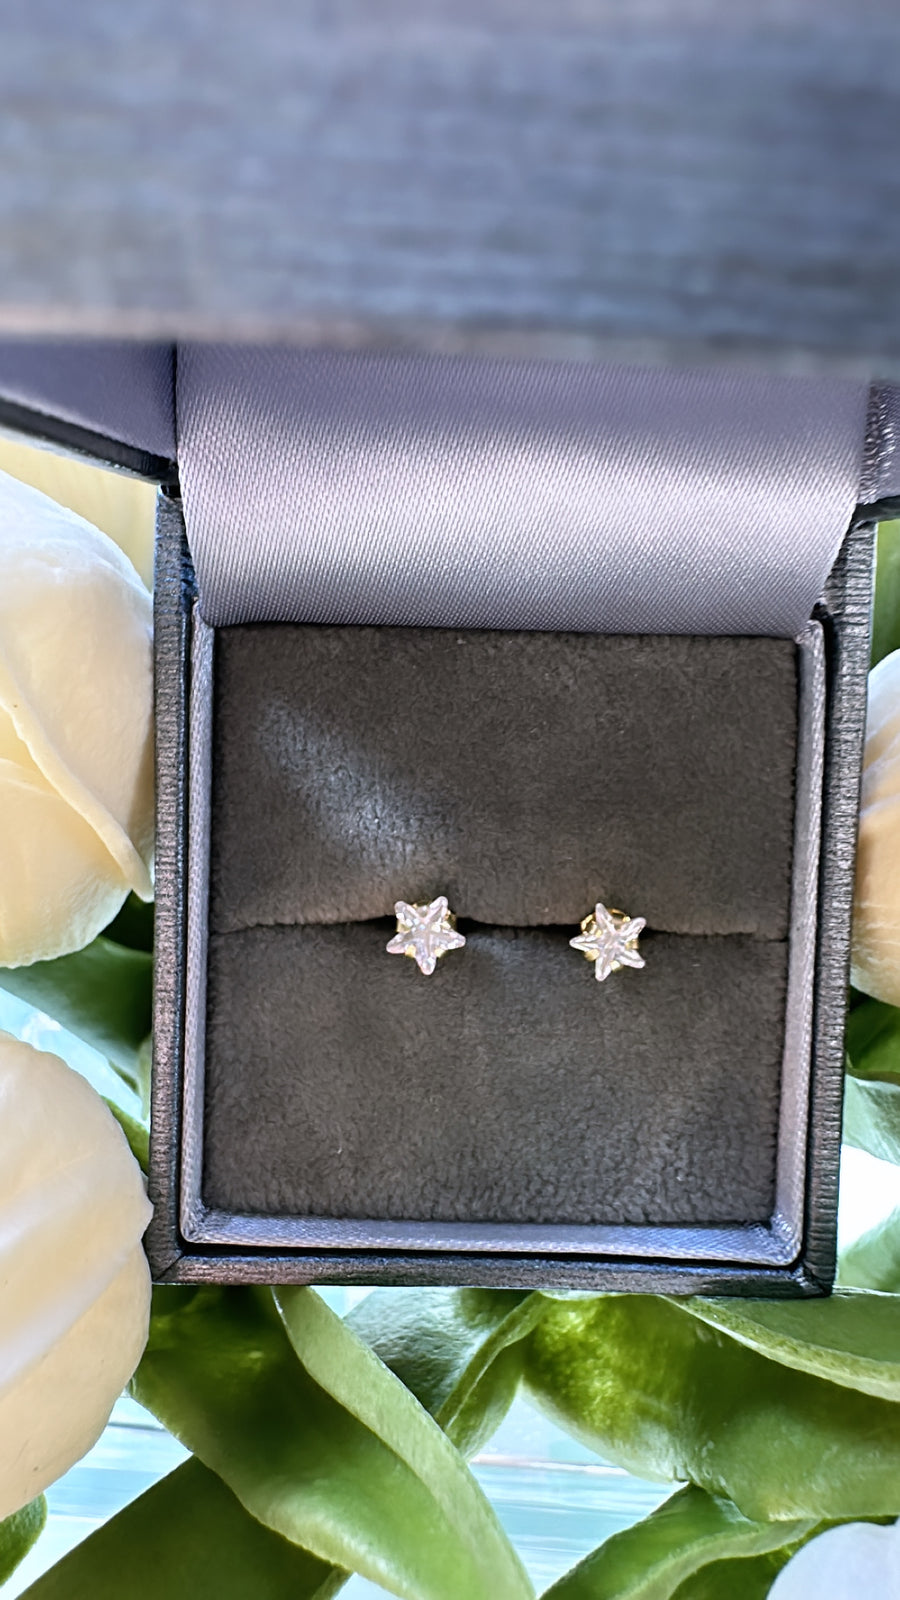 Sparkle Stud Earrings (9ct Solid Gold)